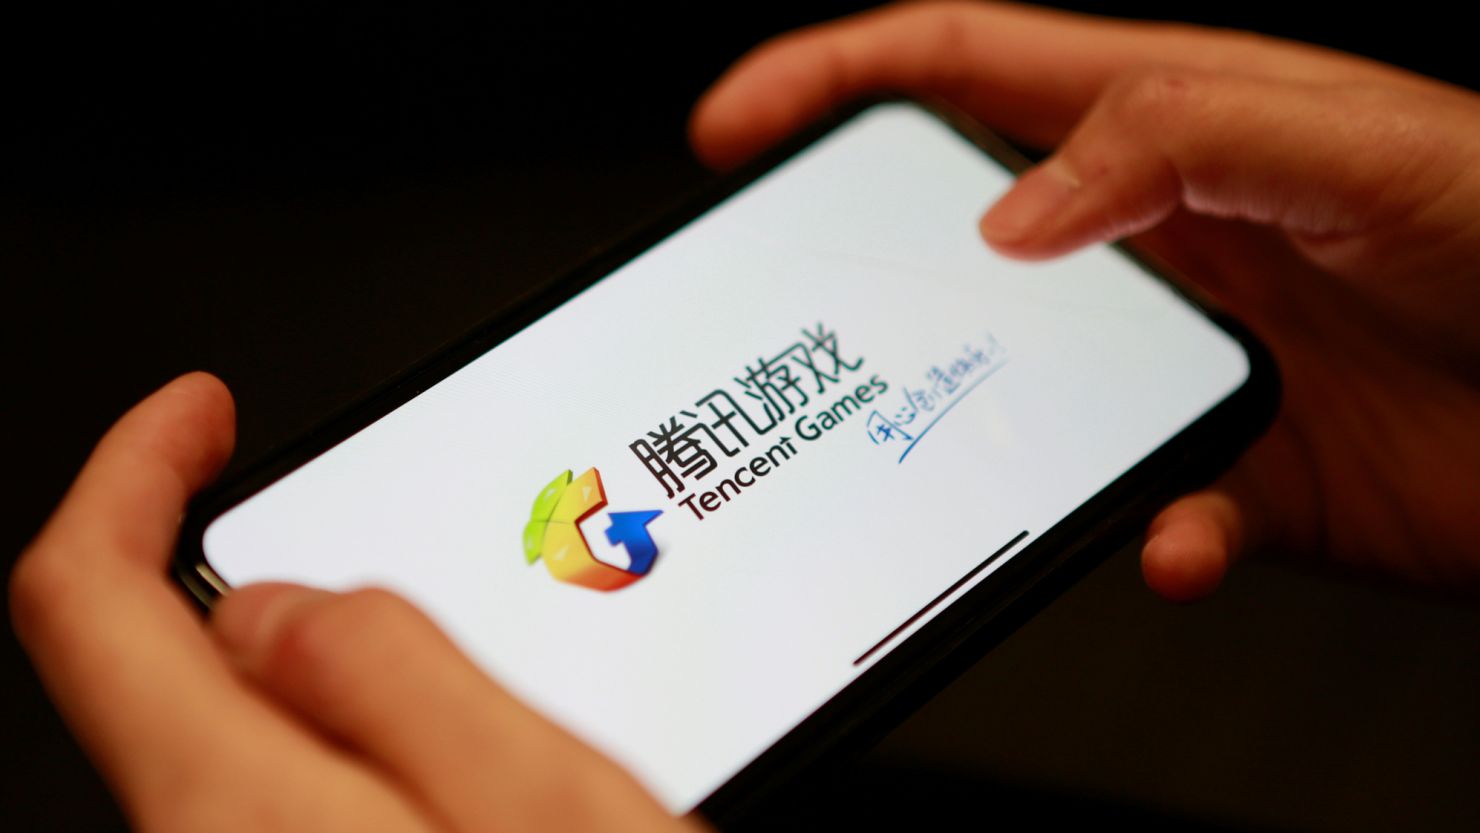 A Tencent Games logo from an app is seen on a mobile phone in this illustration picture taken November 5, 2018. REUTERS/Florence Lo/Illustration